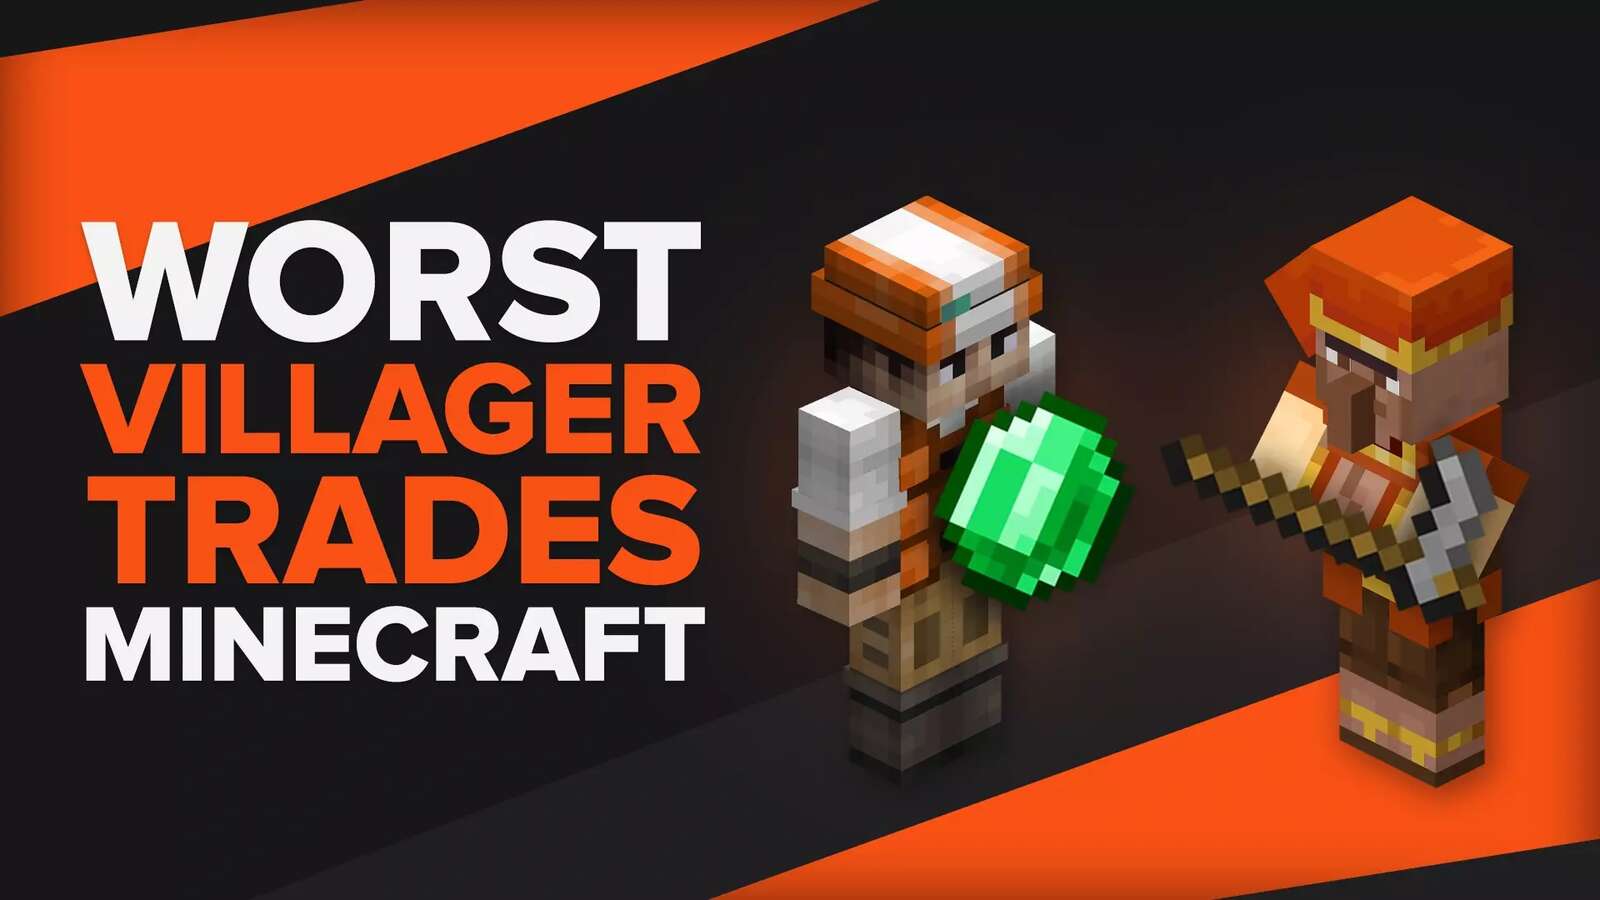 10 Worst Villager Trades You Can Get in Minecraft